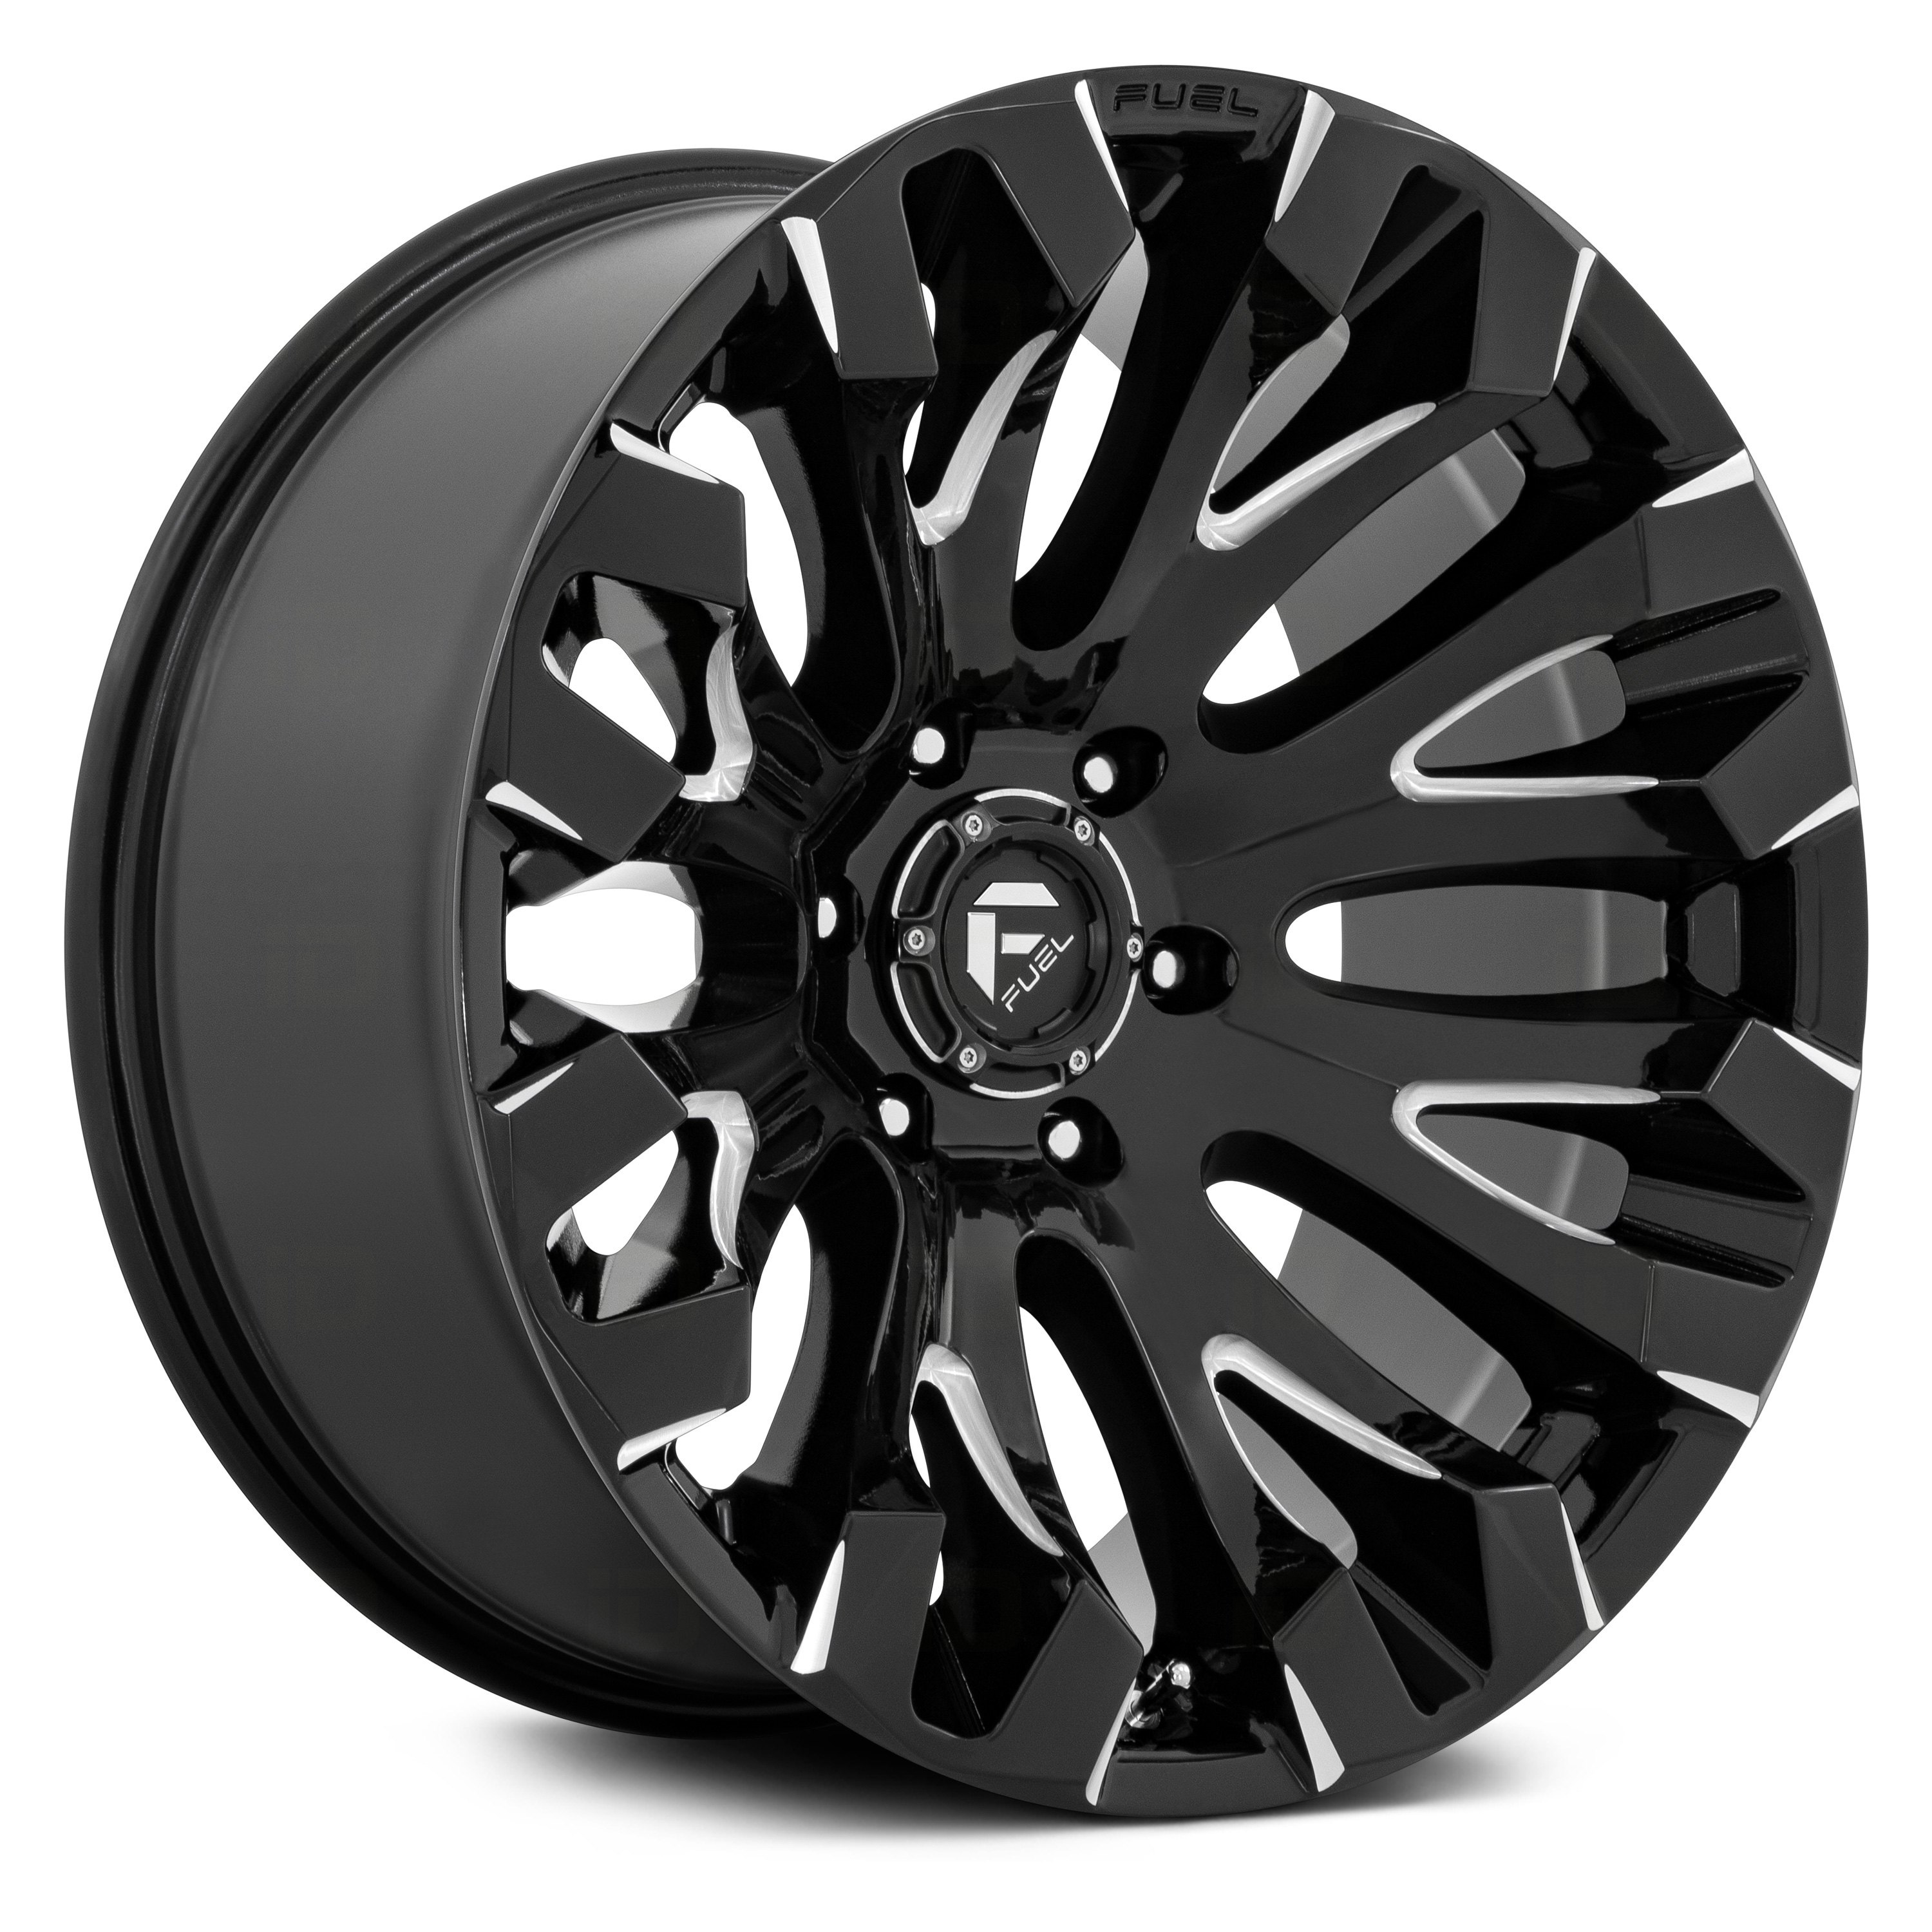 FUEL® D828 QUAKE 1PC Wheels - Gloss Black with Milled Accents Rims 